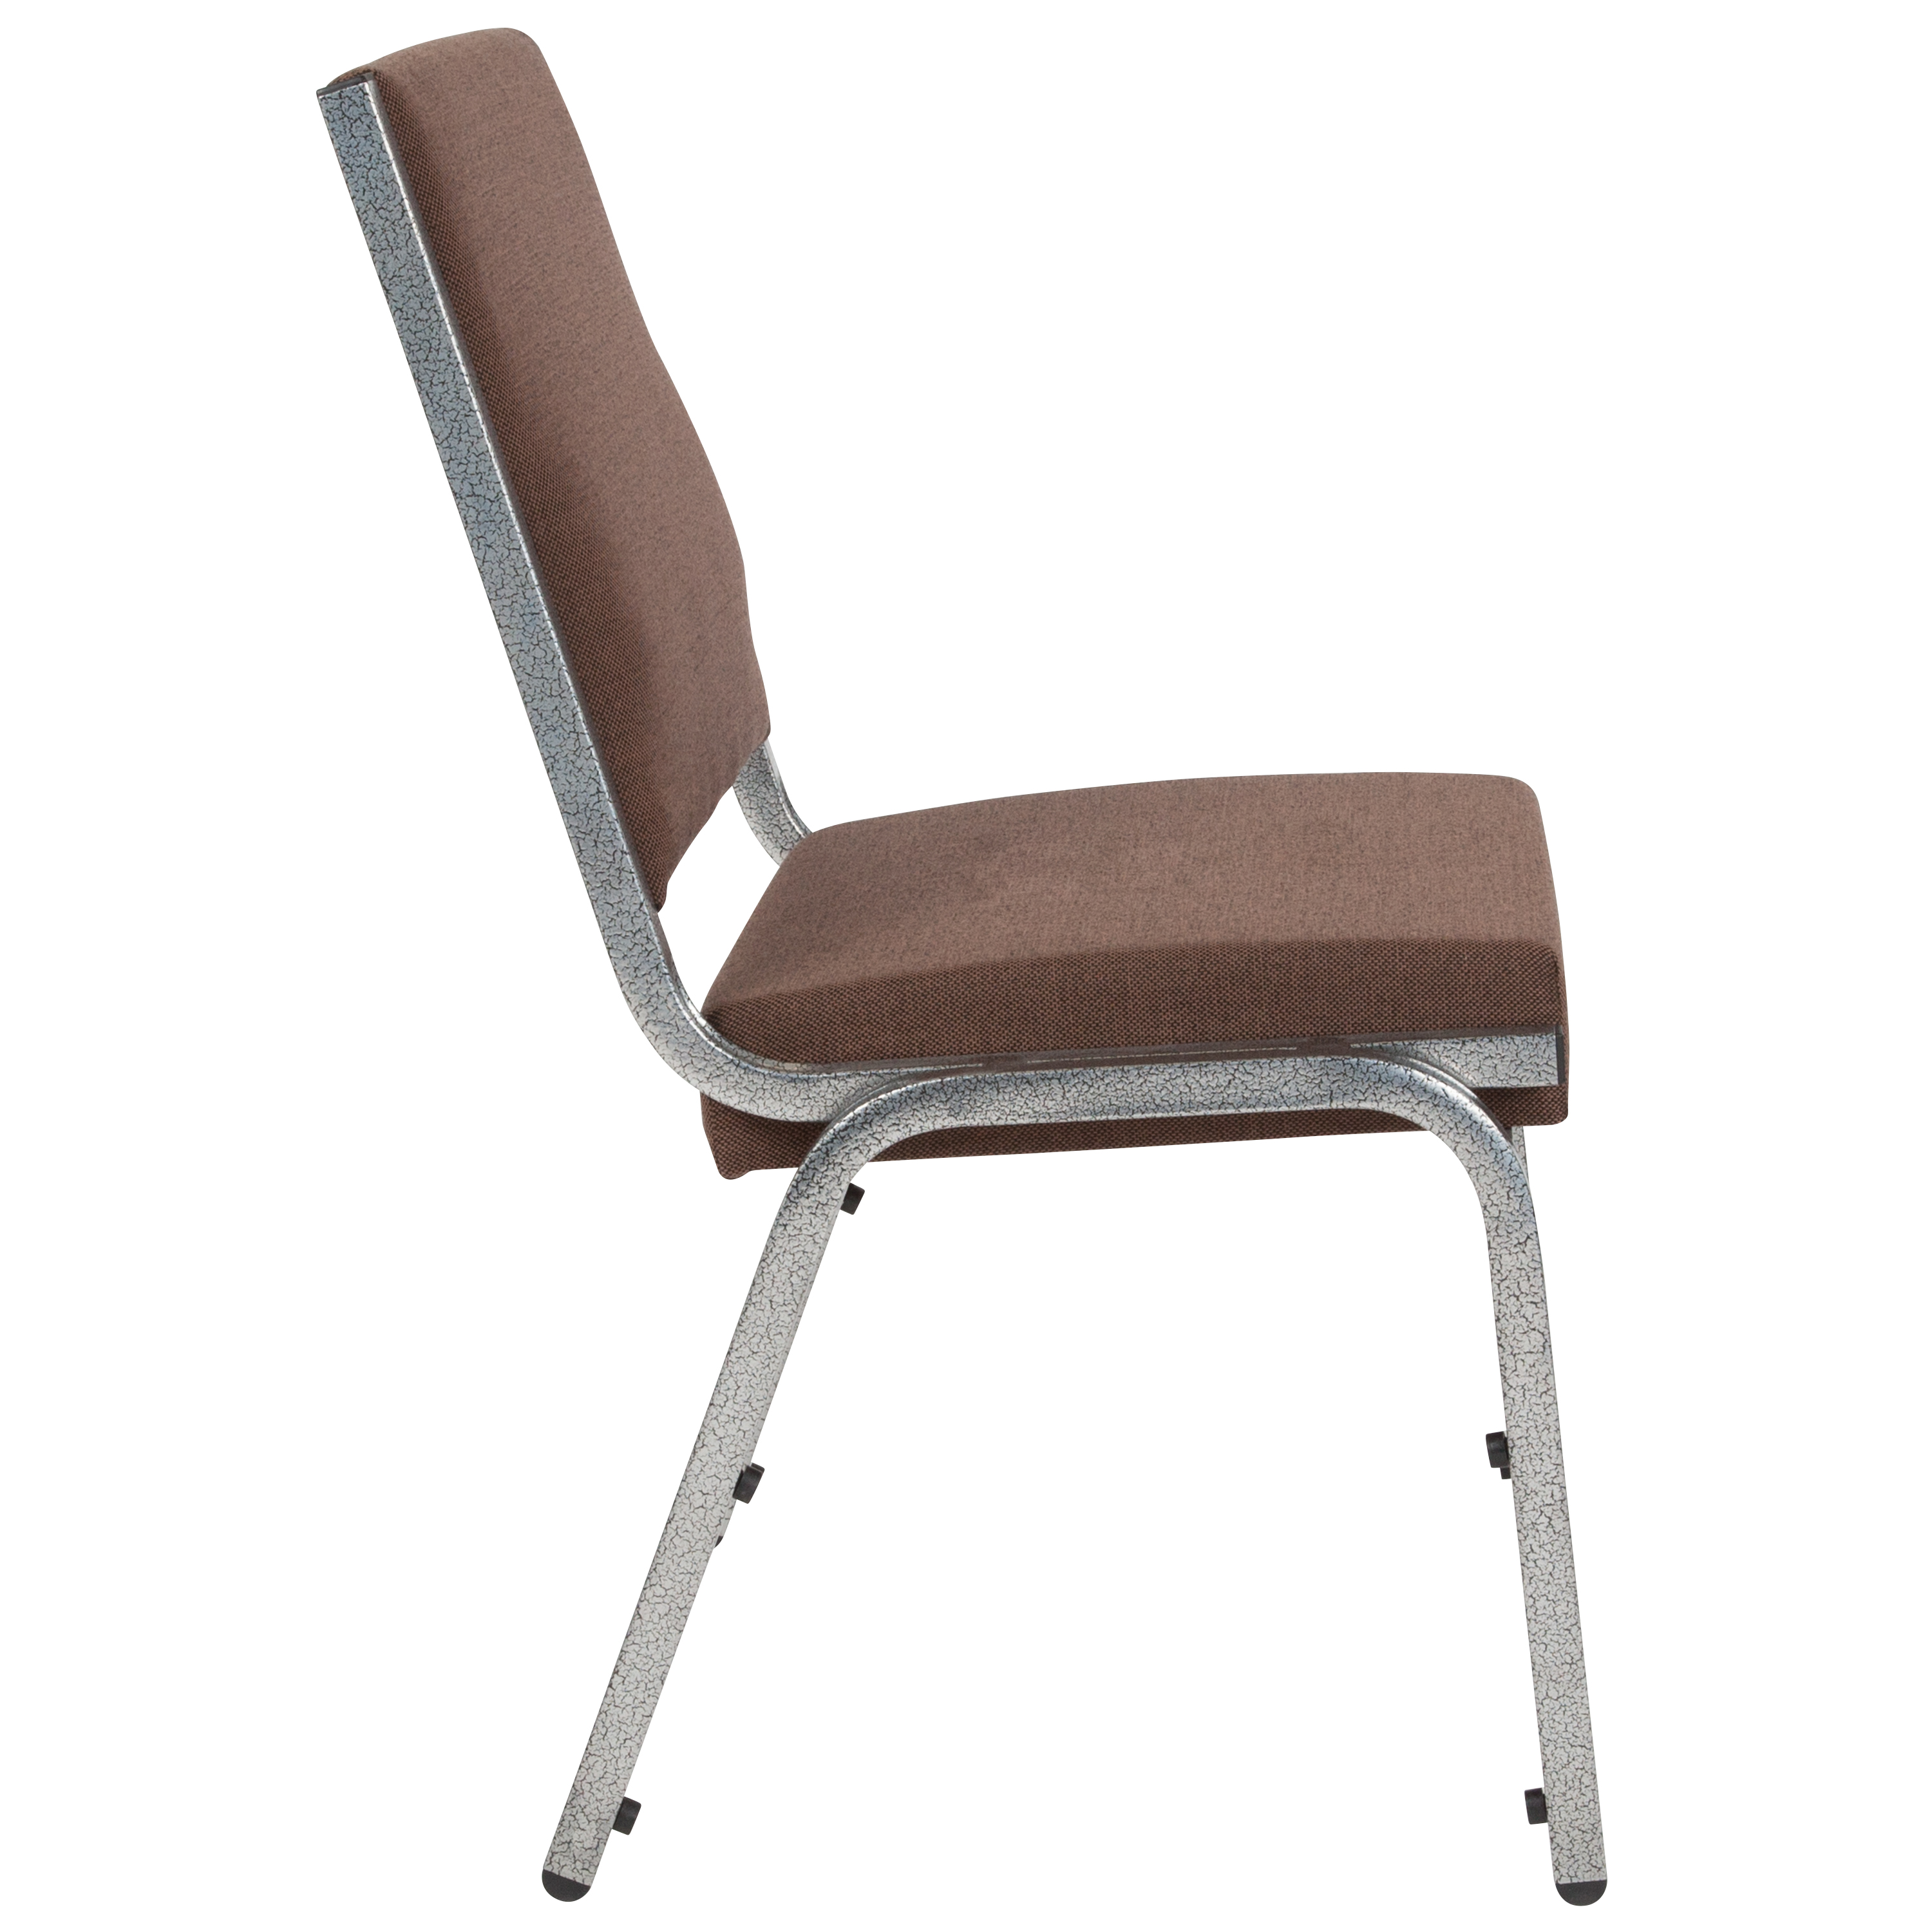 Flash Furniture HERCULES Series 1000 lb. Rated Brown Antimicrobial Fabric Bariatric Medical Reception Chair - image 5 of 6